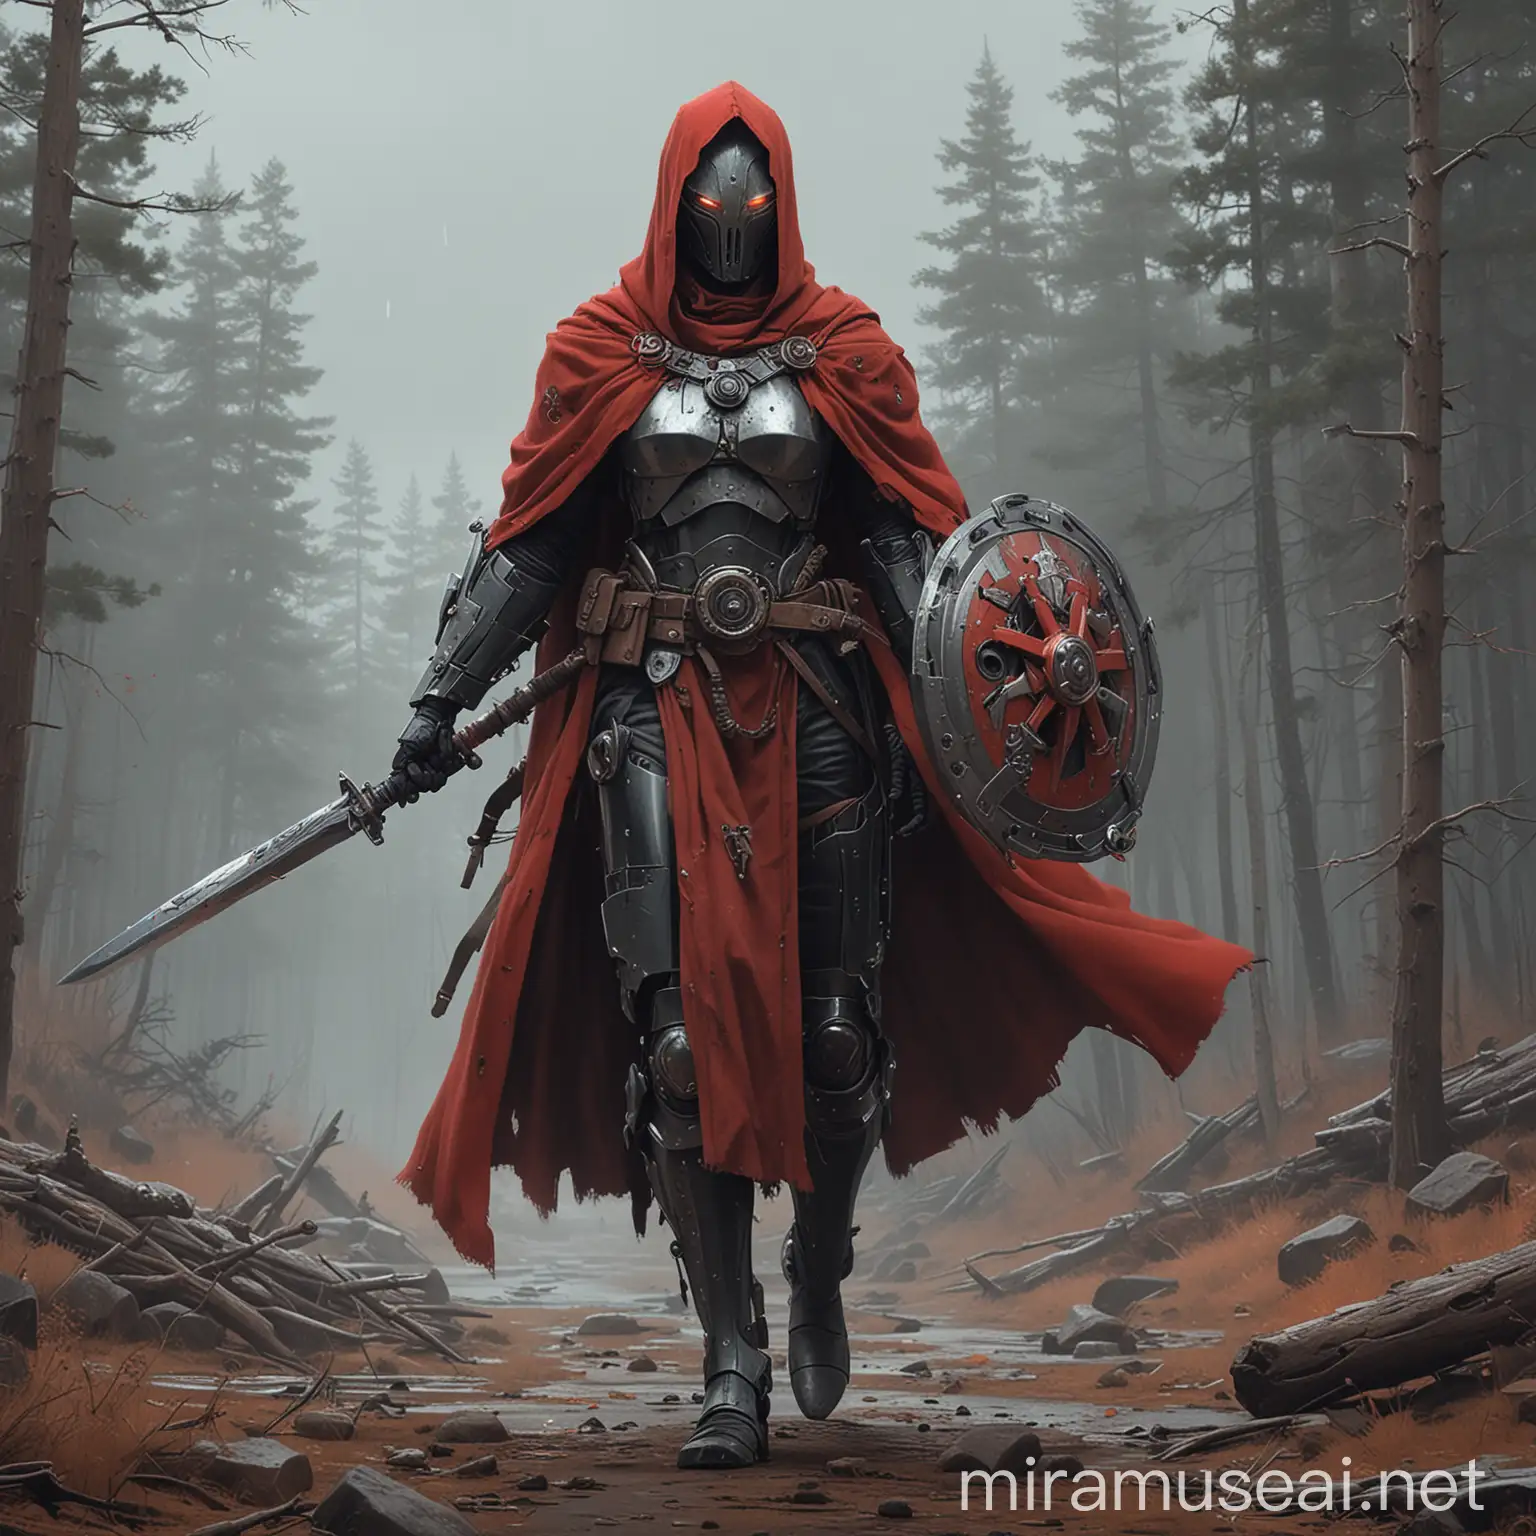 Medieval Robot Engineer Architect with Sword and Shield Concept Art